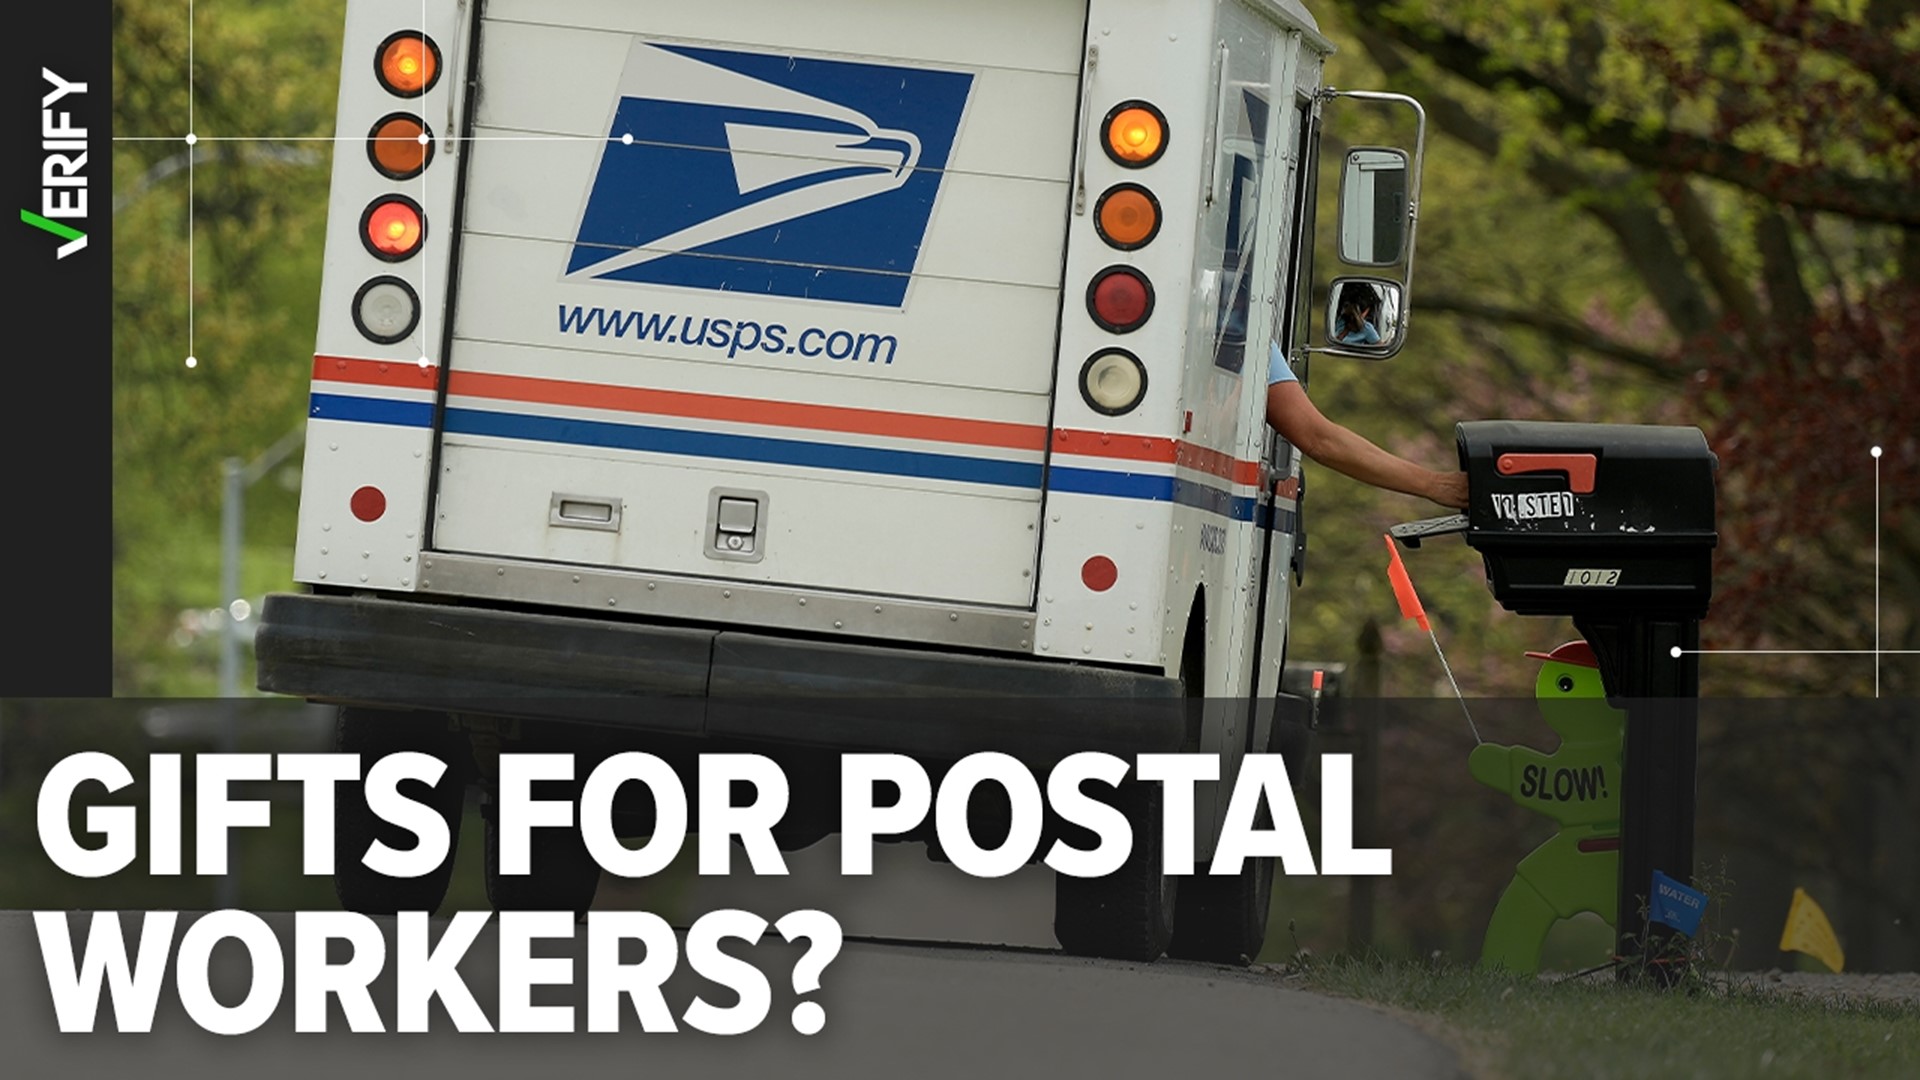 Postal carriers can accept low-value gifts this holiday season, but they cannot accept cash or gifts that can be redeemed for cash.